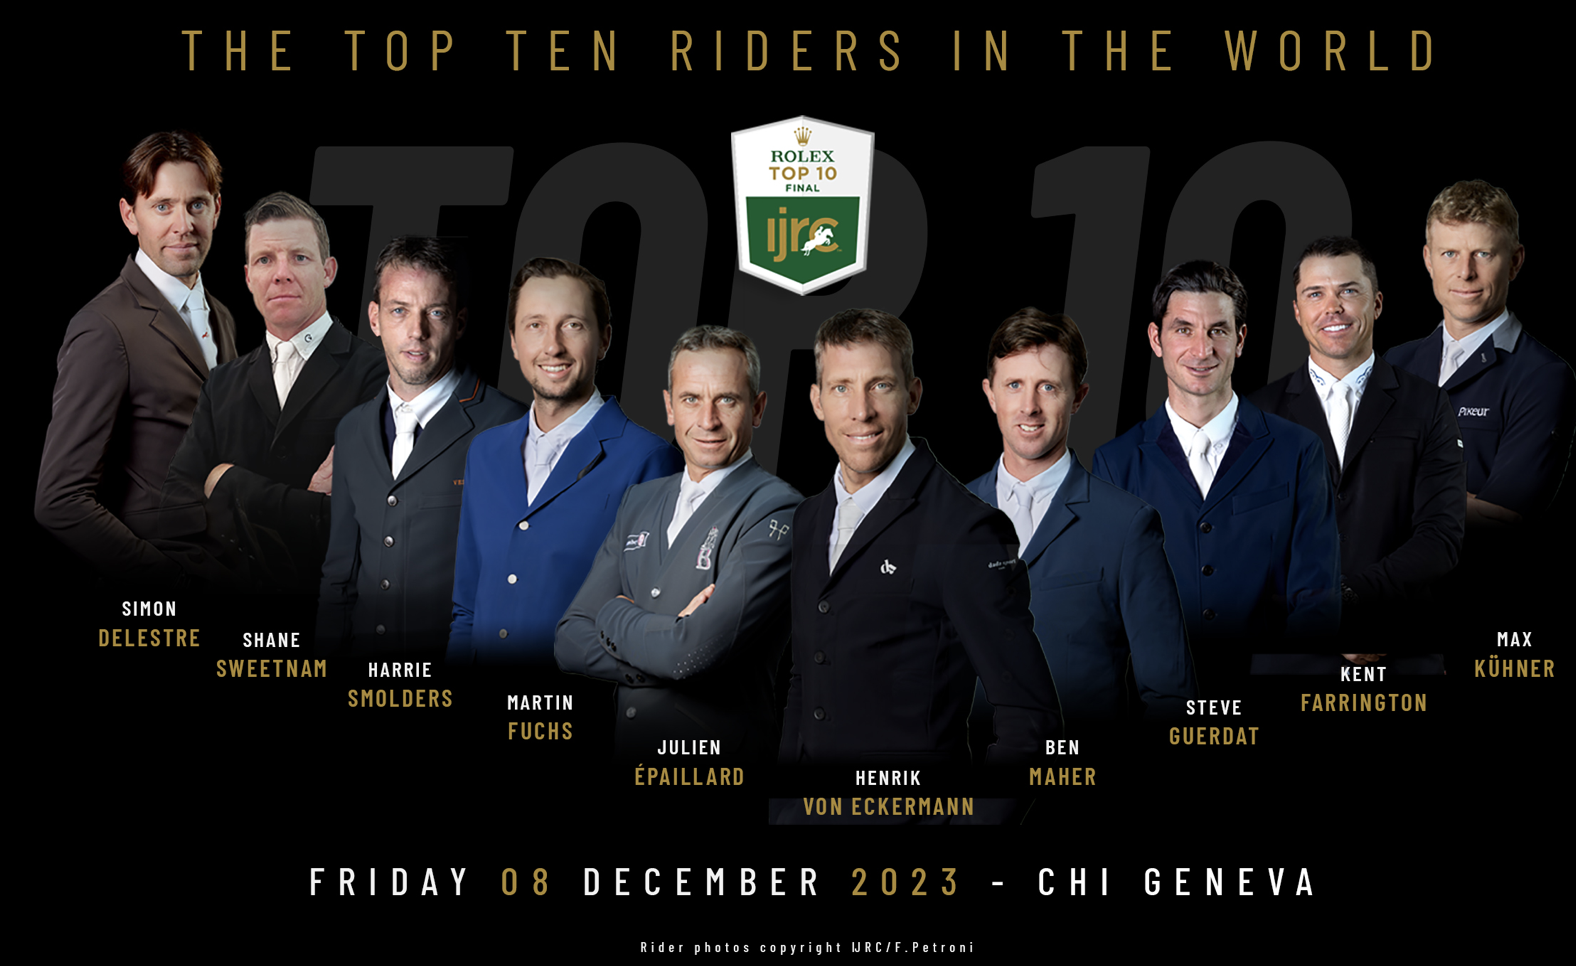 Tomorrow it's finally here: The Rolex IJRC Top 10 Final is ready to go!